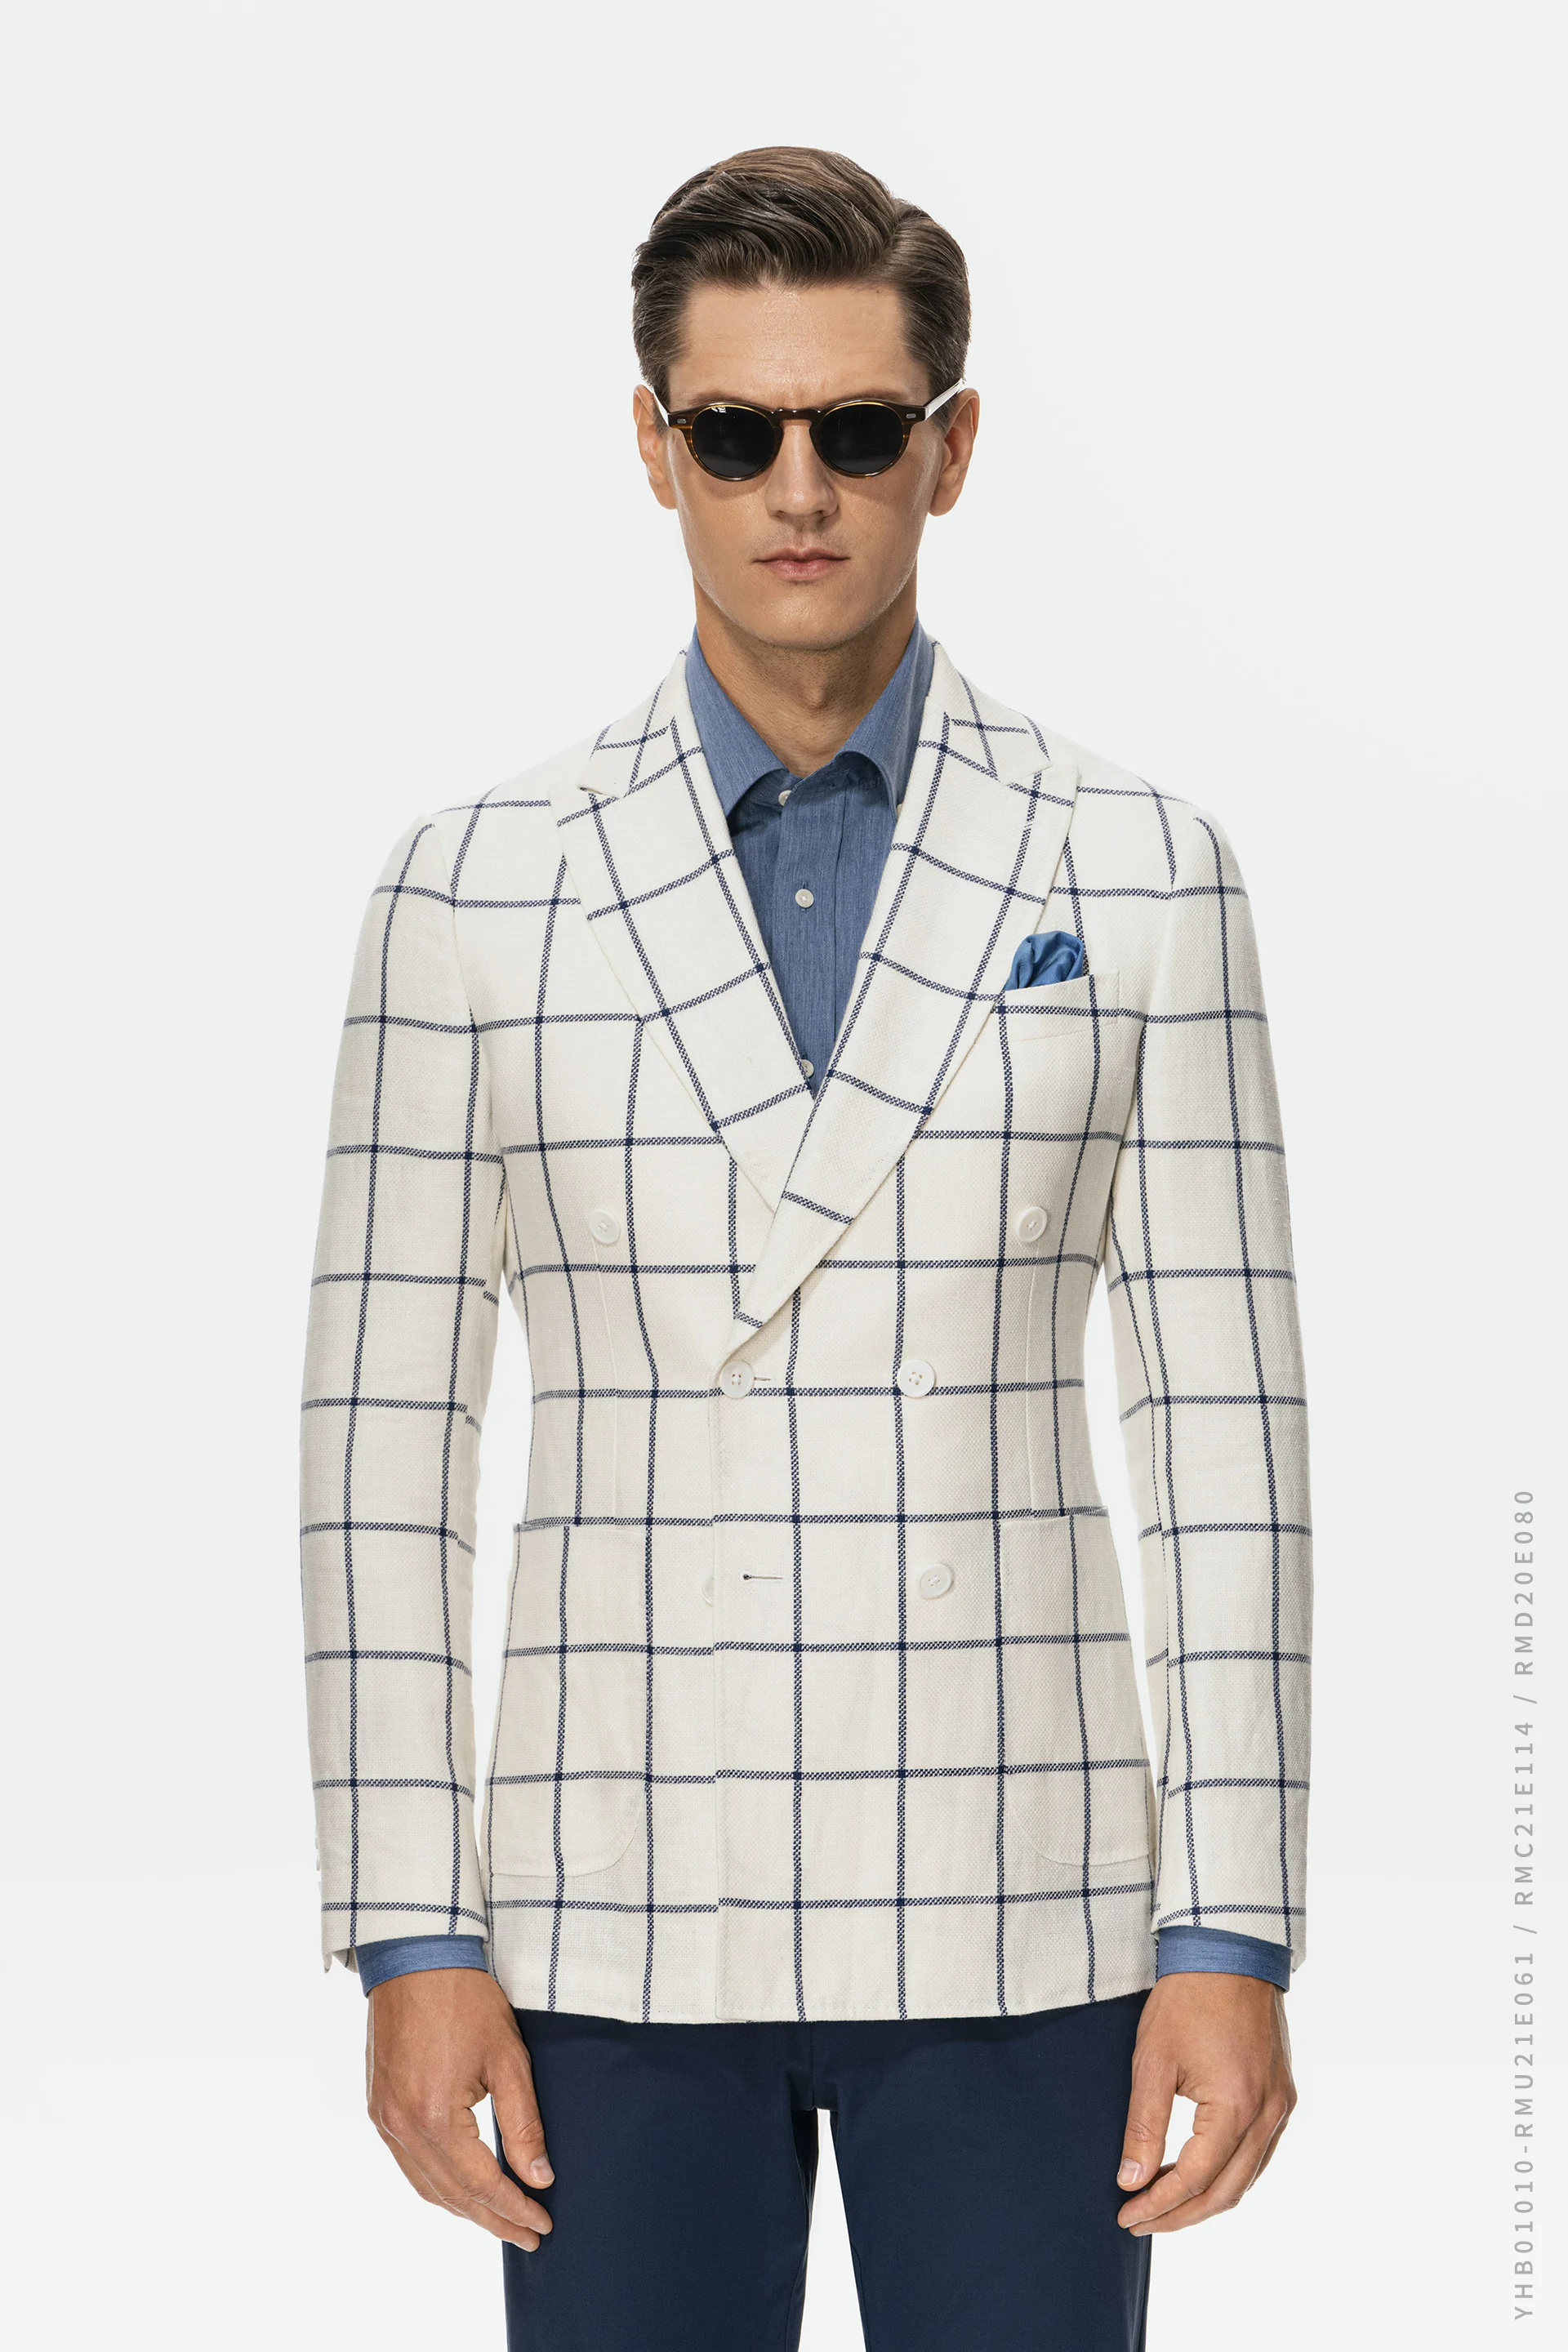 

Luxury Italian Material Made to Measure Men Jacket Bespoke Leisure Blazer Linen Off White Plaid Wool Blended Fabric Cool Summer